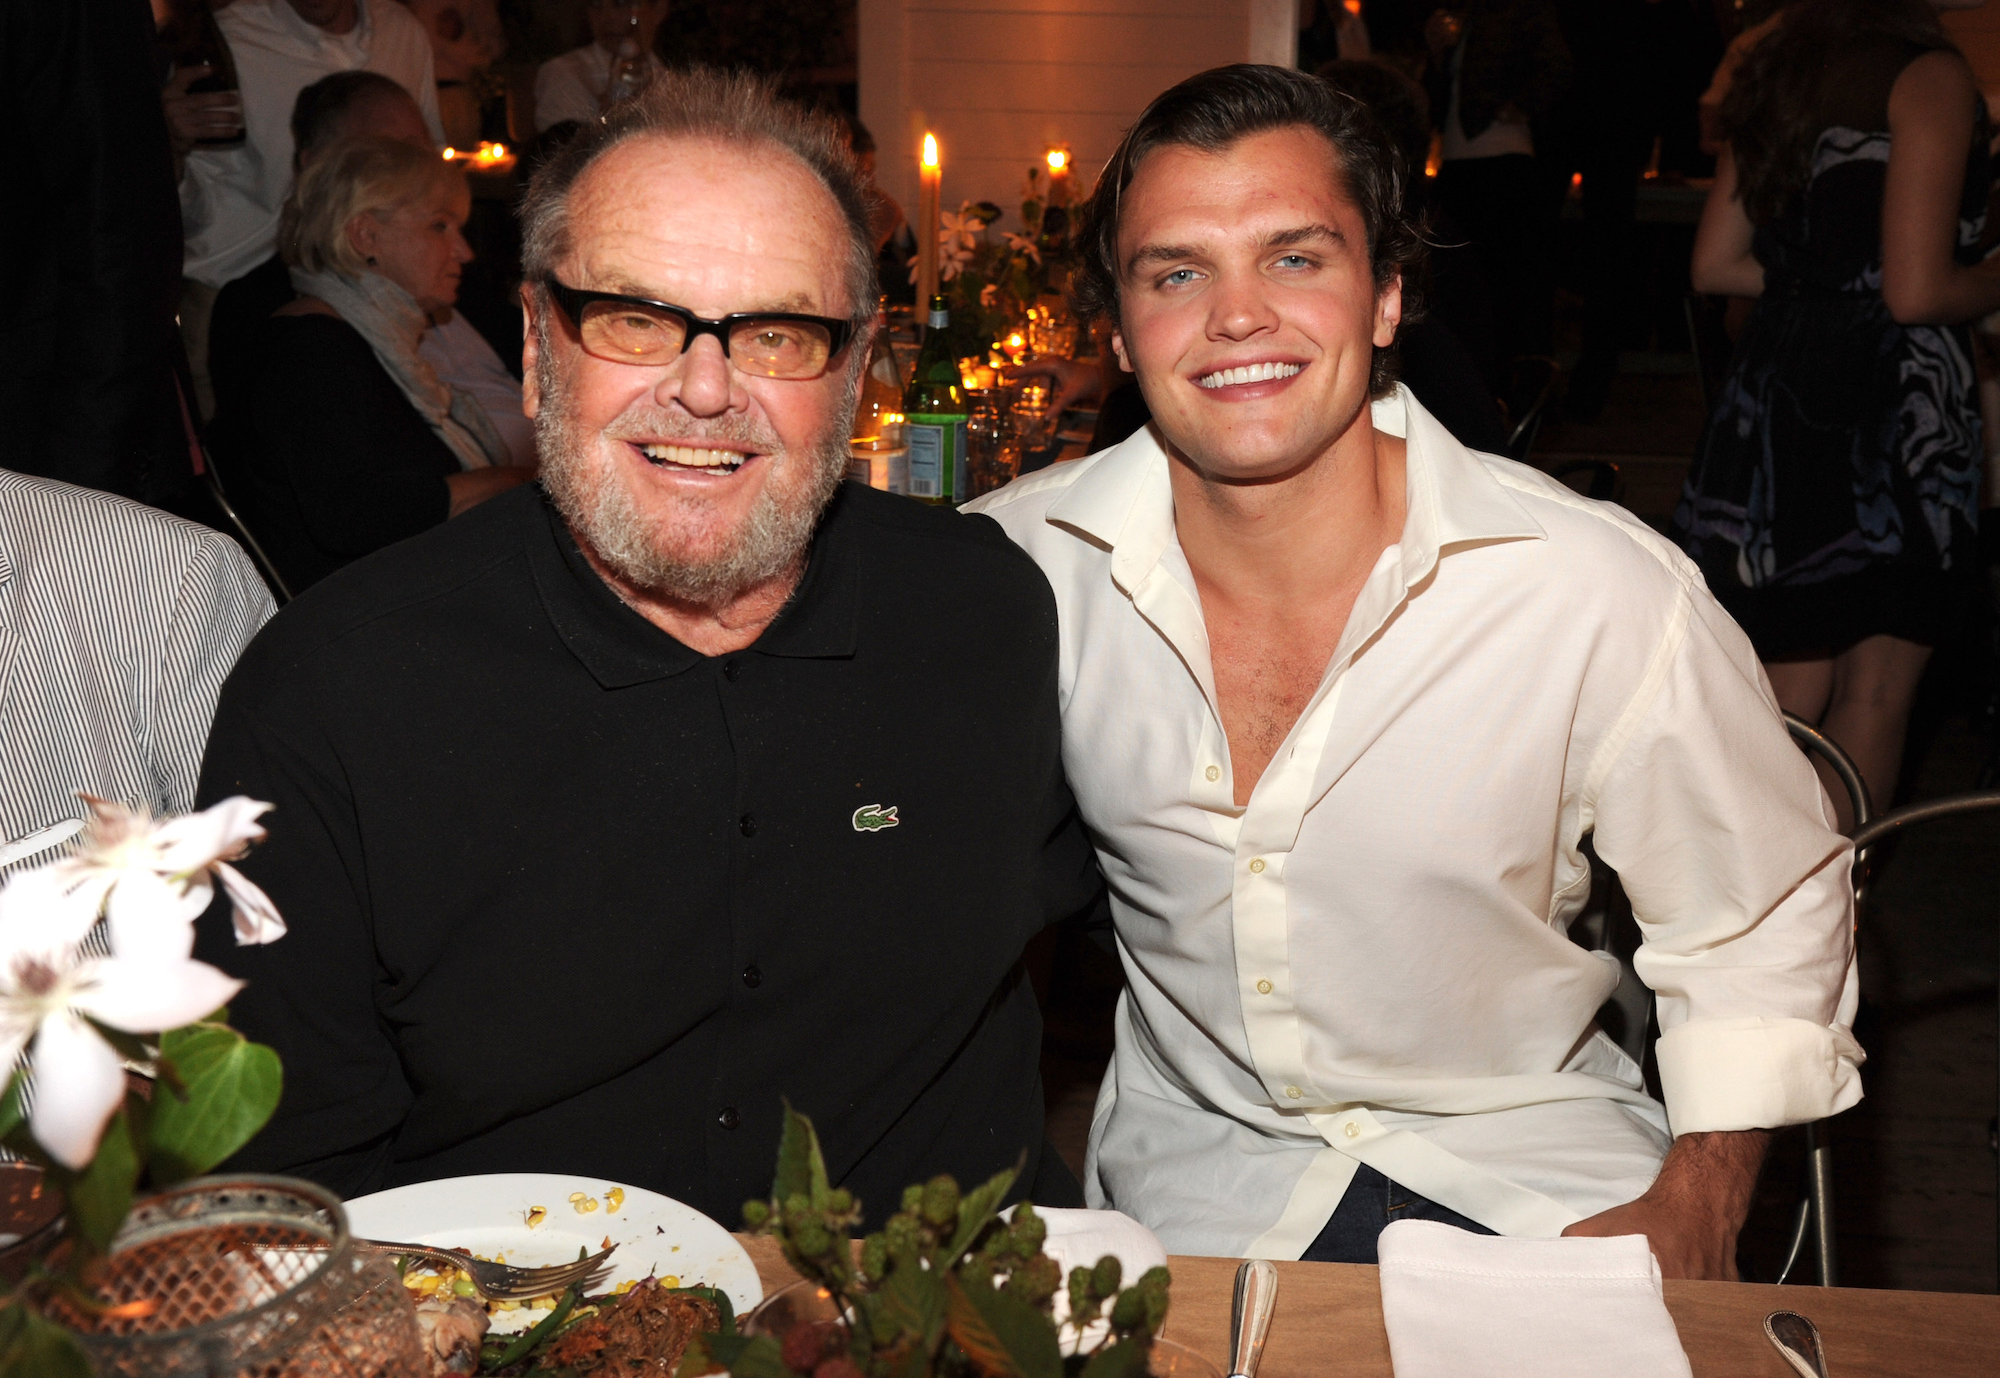 (L-R) Jack Nicholson and Ray Nicholson smiling at a dinner table